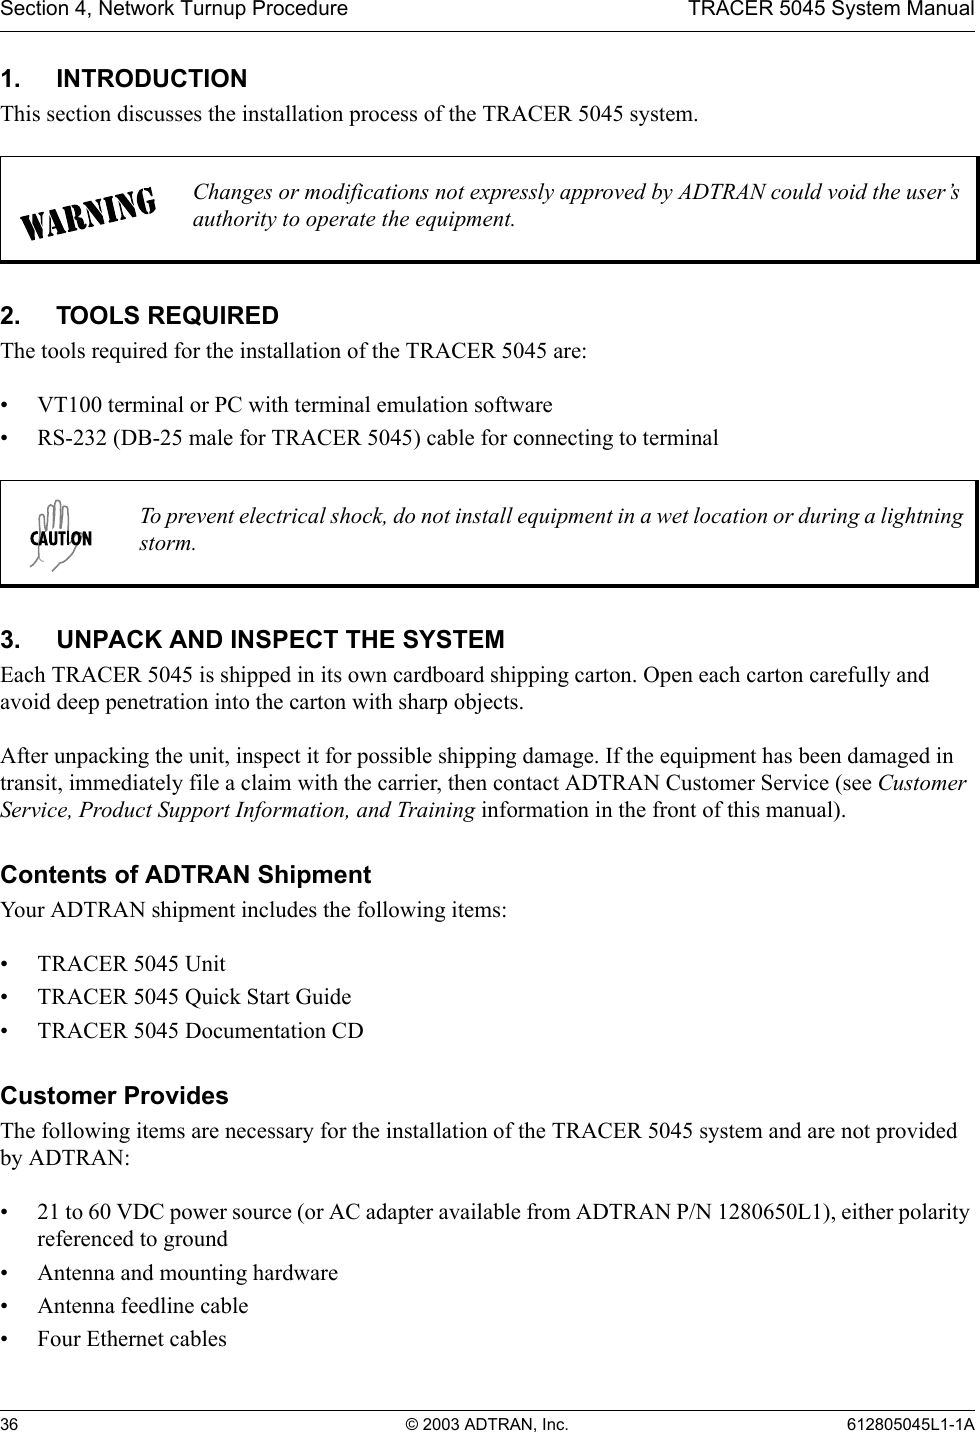 Section 4, Network Turnup Procedure TRACER 5045 System Manual36 © 2003 ADTRAN, Inc. 612805045L1-1A1. INTRODUCTIONThis section discusses the installation process of the TRACER 5045 system.2. TOOLS REQUIREDThe tools required for the installation of the TRACER 5045 are:• VT100 terminal or PC with terminal emulation software• RS-232 (DB-25 male for TRACER 5045) cable for connecting to terminal3. UNPACK AND INSPECT THE SYSTEMEach TRACER 5045 is shipped in its own cardboard shipping carton. Open each carton carefully and avoid deep penetration into the carton with sharp objects. After unpacking the unit, inspect it for possible shipping damage. If the equipment has been damaged in transit, immediately file a claim with the carrier, then contact ADTRAN Customer Service (see Customer Service, Product Support Information, and Training information in the front of this manual).Contents of ADTRAN ShipmentYour ADTRAN shipment includes the following items:• TRACER 5045 Unit• TRACER 5045 Quick Start Guide• TRACER 5045 Documentation CDCustomer ProvidesThe following items are necessary for the installation of the TRACER 5045 system and are not provided by ADTRAN:• 21 to 60 VDC power source (or AC adapter available from ADTRAN P/N 1280650L1), either polarity referenced to ground• Antenna and mounting hardware• Antenna feedline cable• Four Ethernet cablesChanges or modifications not expressly approved by ADTRAN could void the user’s authority to operate the equipment.To prevent electrical shock, do not install equipment in a wet location or during a lightning storm.